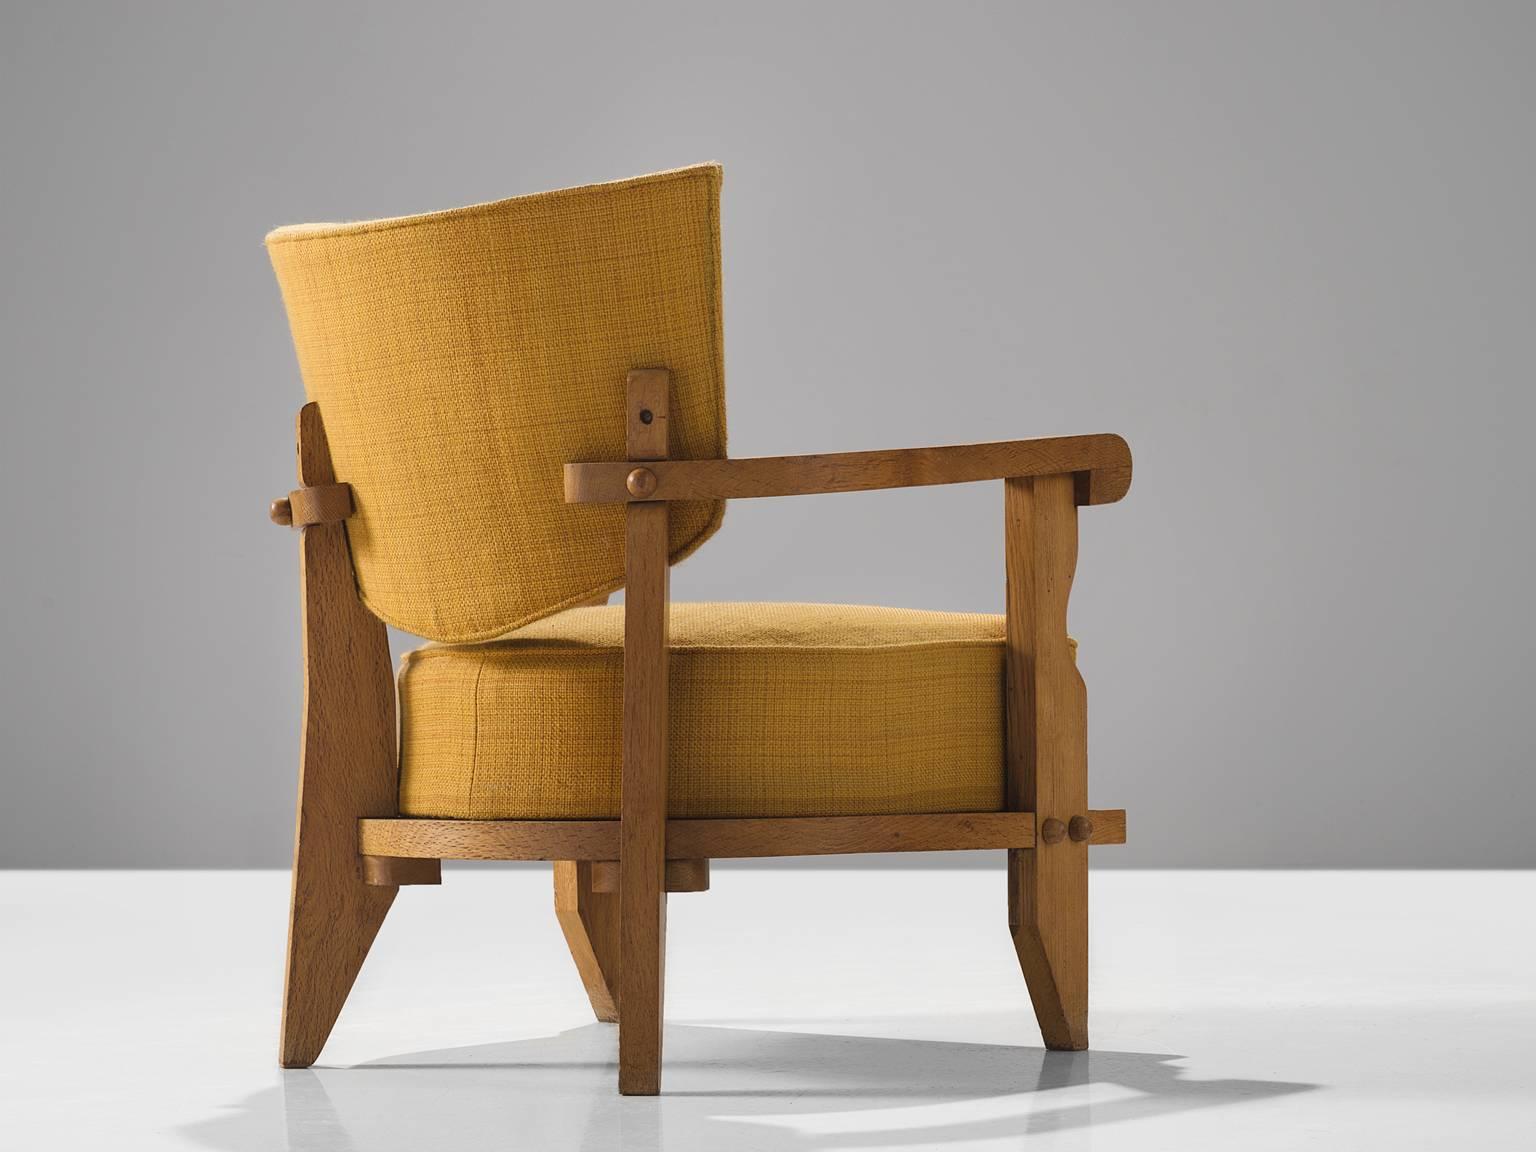 Jacques Chambron and Robert Guillerme, easy chair, yellow fabric, oak, France, 1950s

This sculptural easy chair by Guillerme and Chambron is very well executed and made out of solid, carved blond oak. This comfortable armchair features an